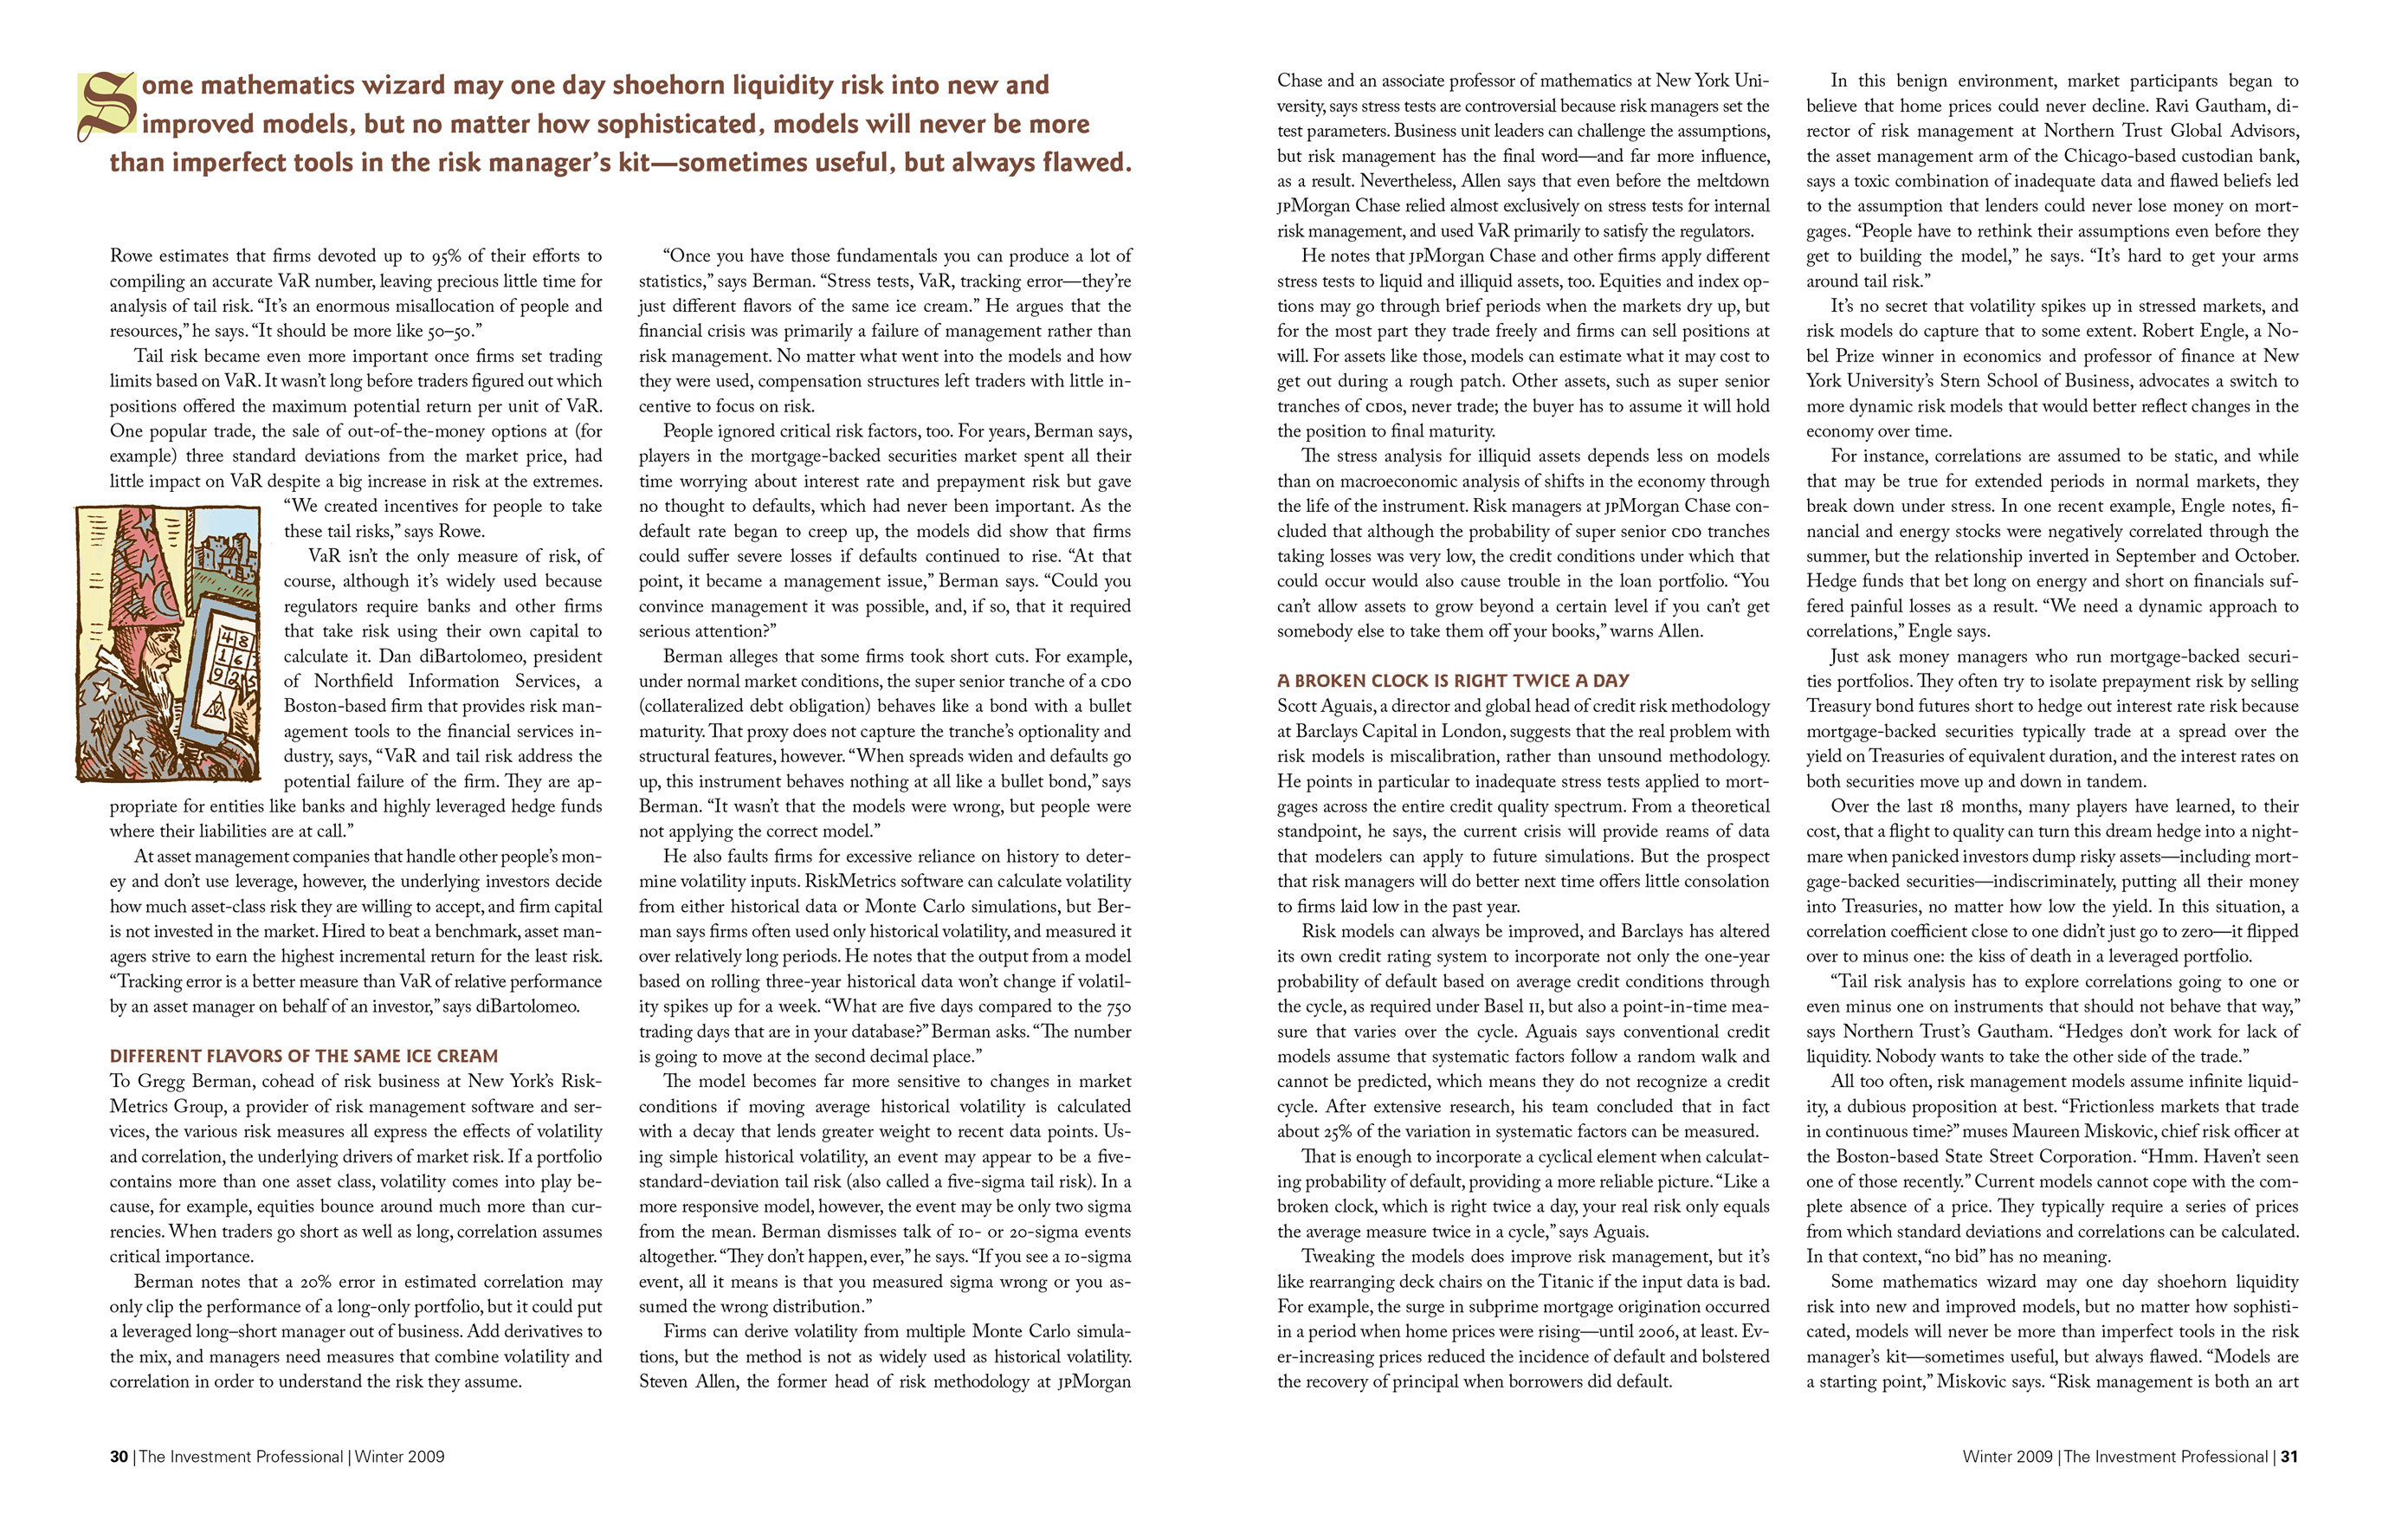 Second spread of the article titled 'The Greater Fool Theory.' The initial cap of the pull quote is styled like a letter in a medieval manuscript. A small illustration set into the text shows a medieval wizard writing esoteric calculations.